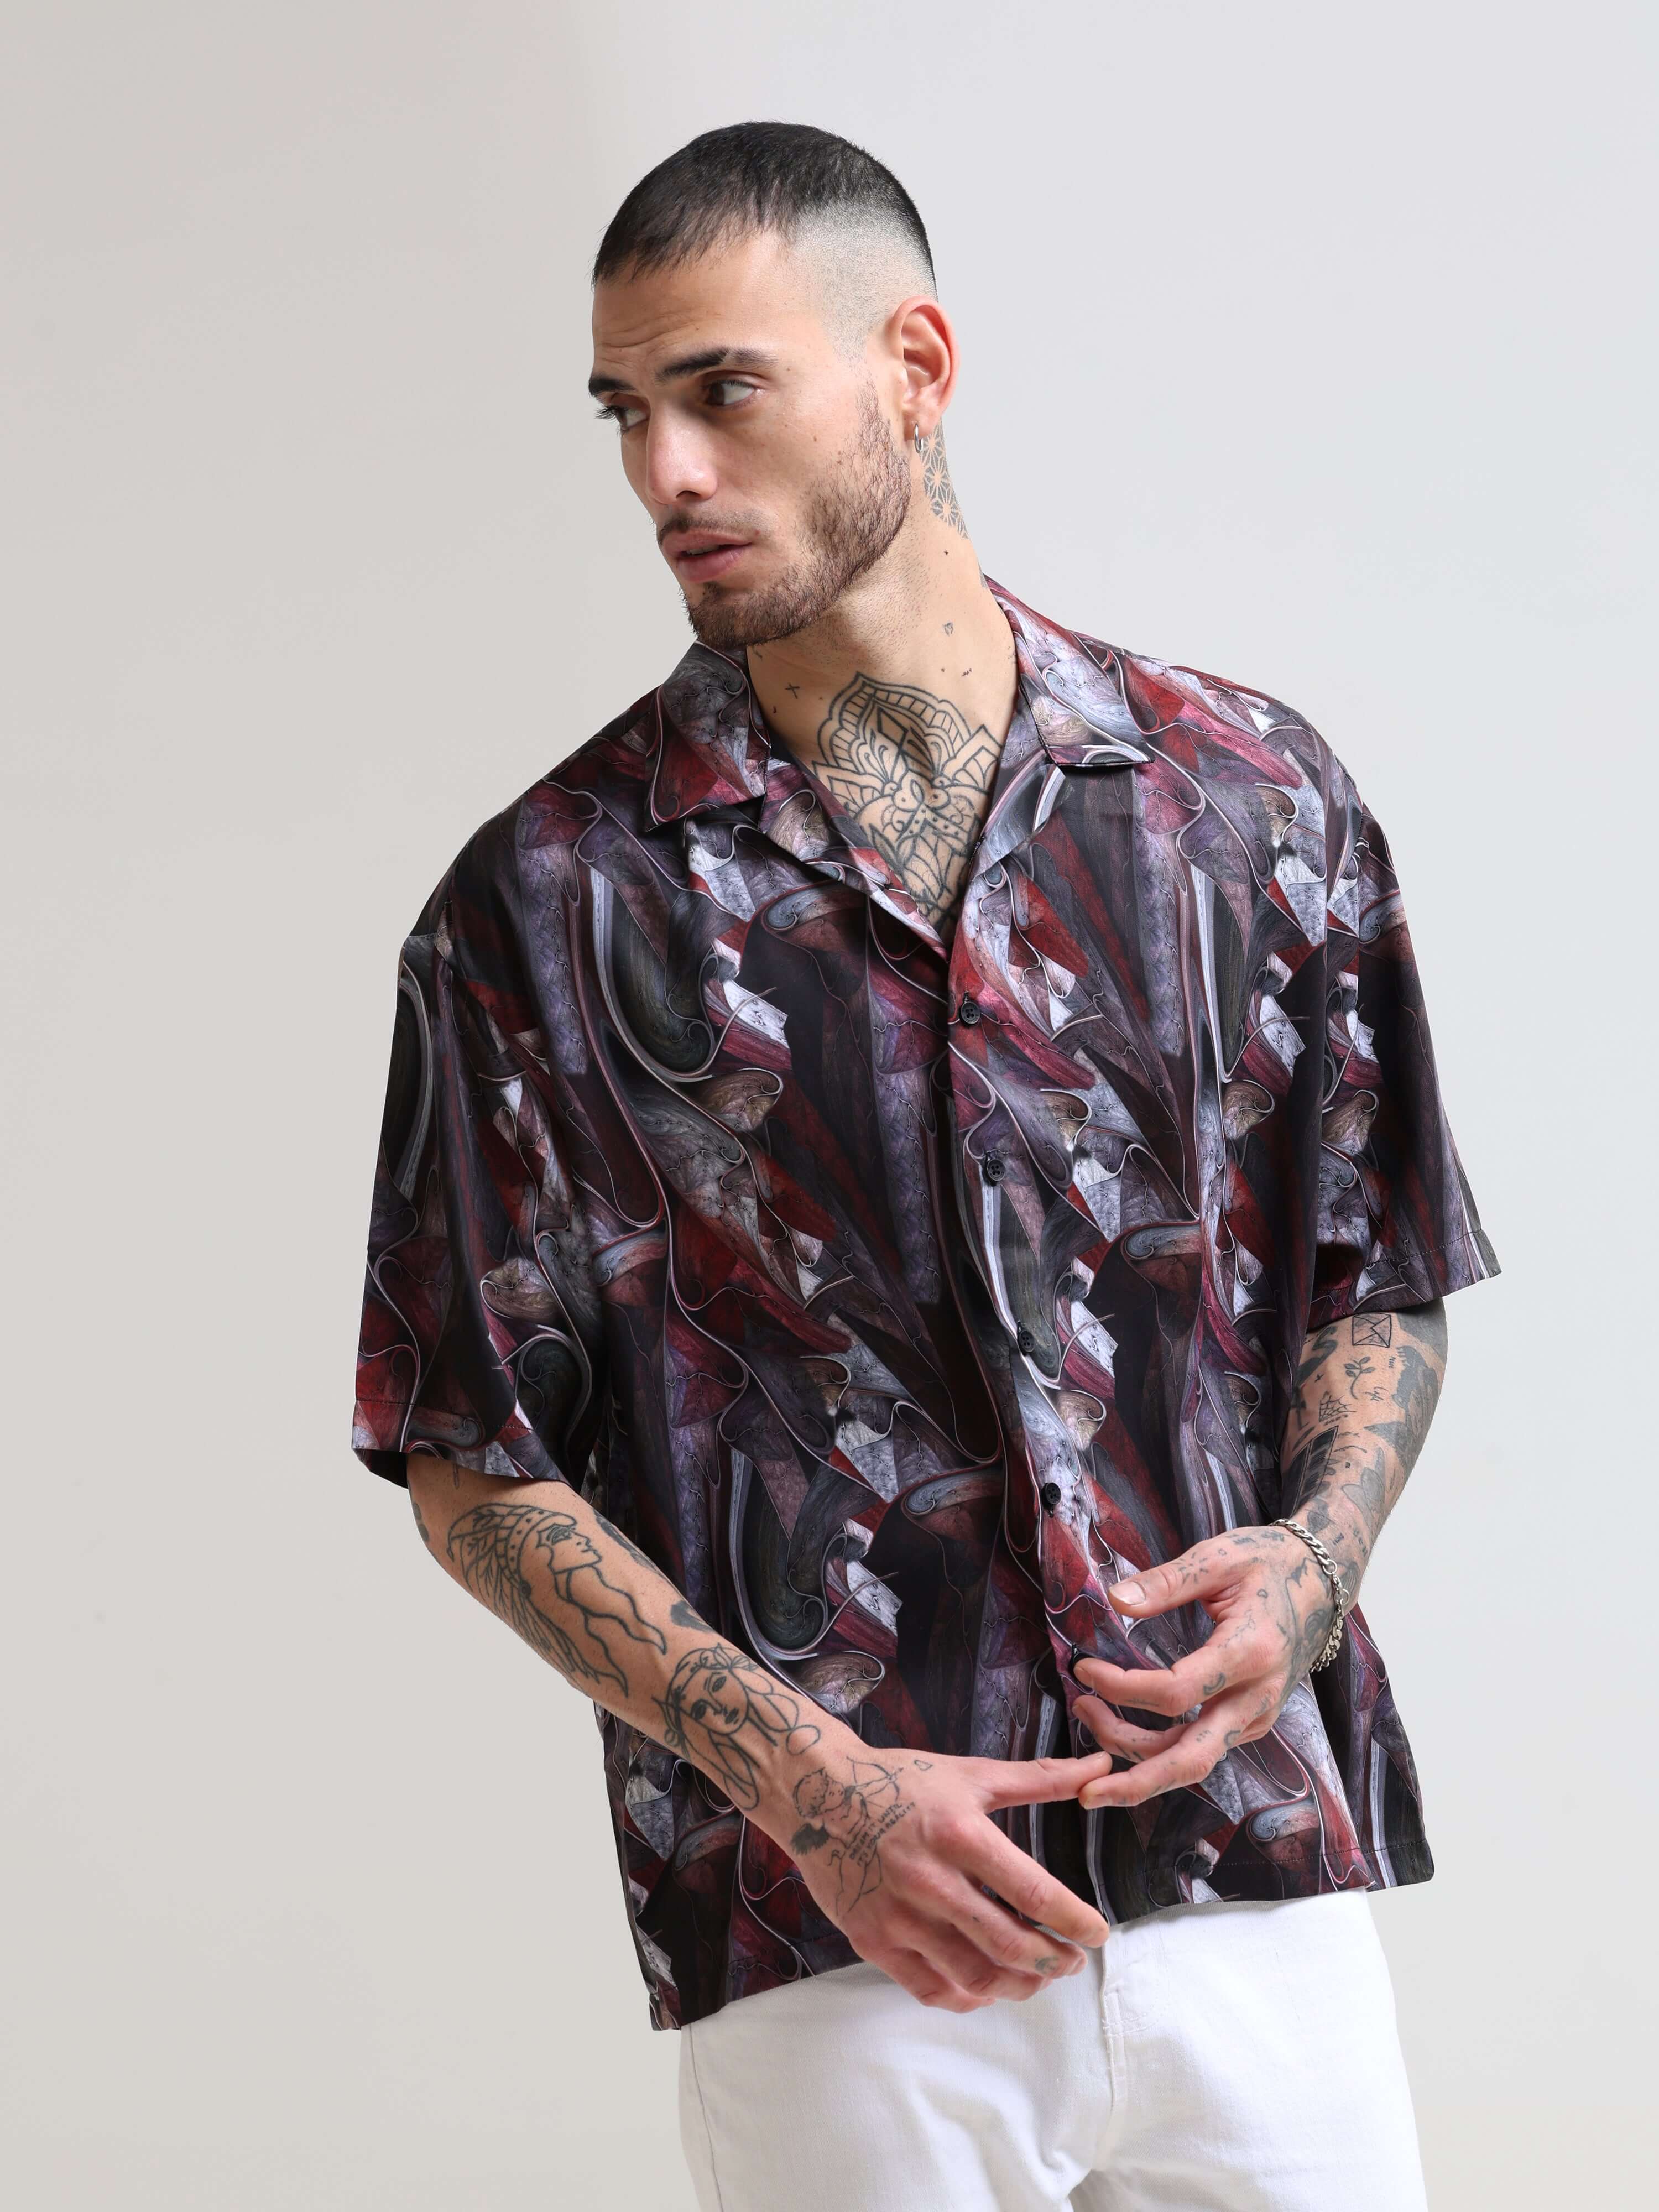 Cuban Wave Oversized Shirt shop online at Estilocus. Our Cuban Wave Oversized Shirt is perfect for those Hawaiian days. The relaxed fit and lightweight fabric make it comfortable to wear all day. Its classic style is perfect for those summer streetwear lo